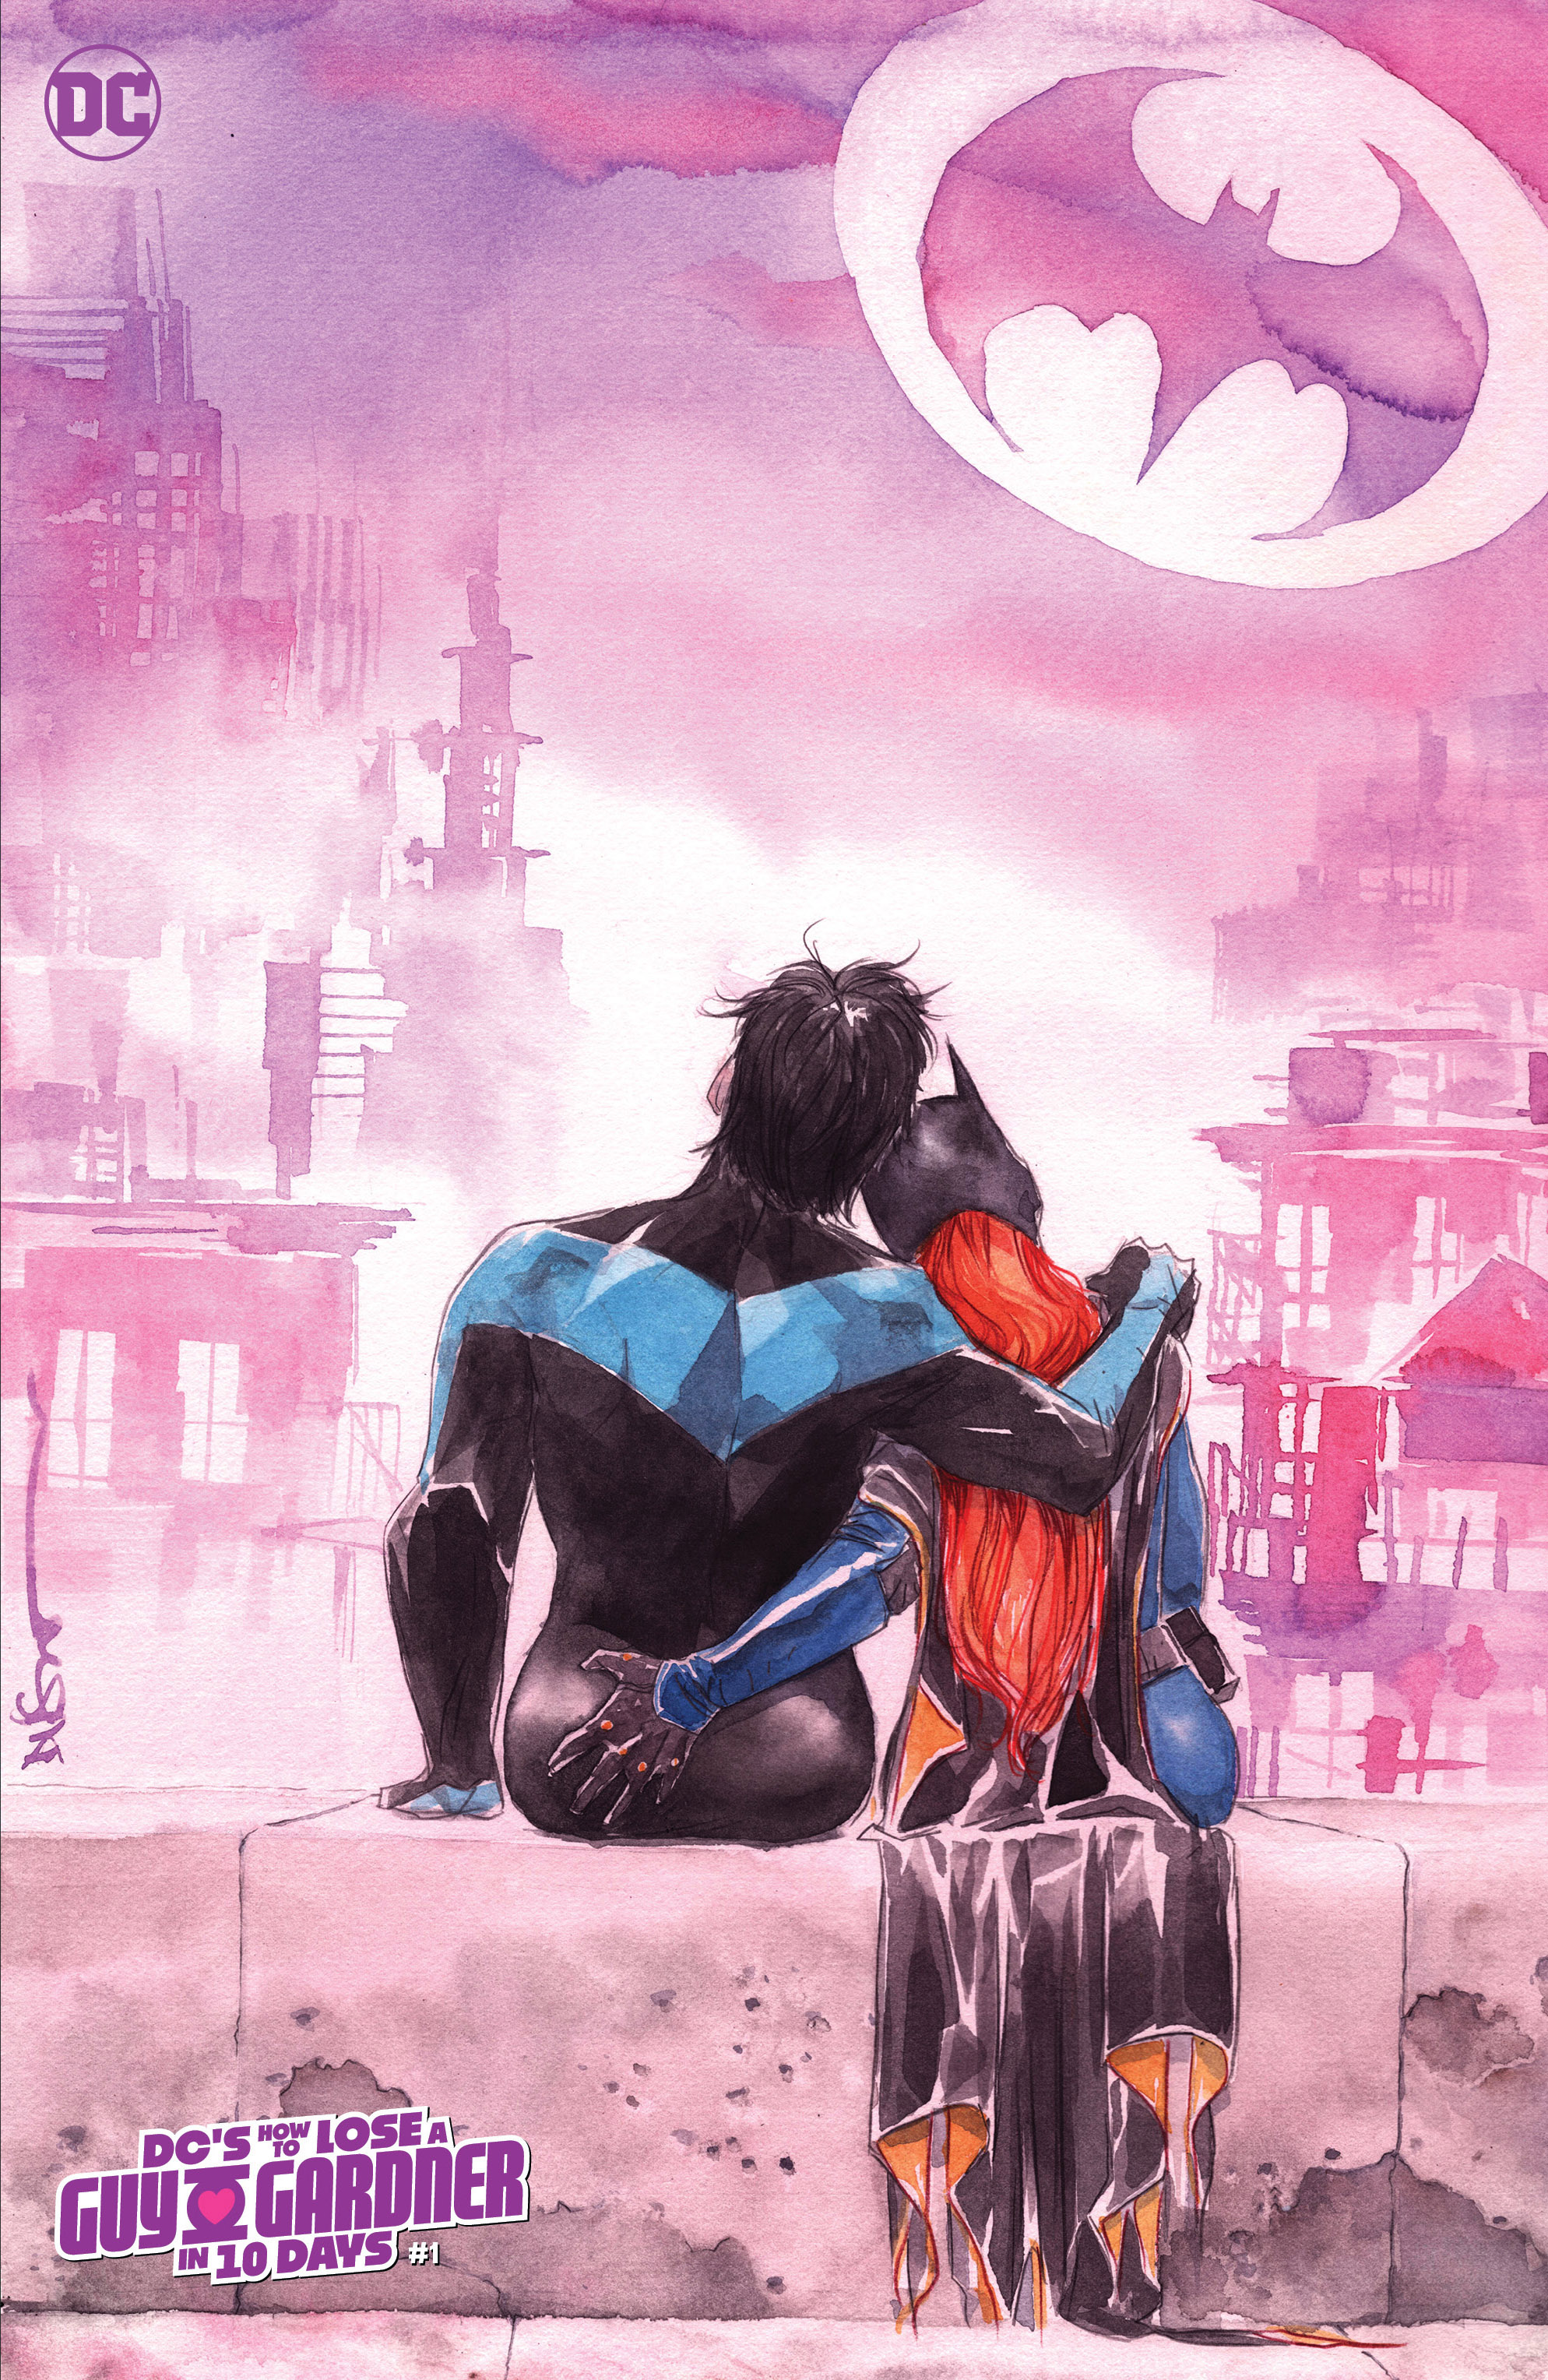 DC's How to Lose a Guy Gardner in 10 Days #1 (One Shot) Cover D 1 for 25 Incentive Dustin Nguyen